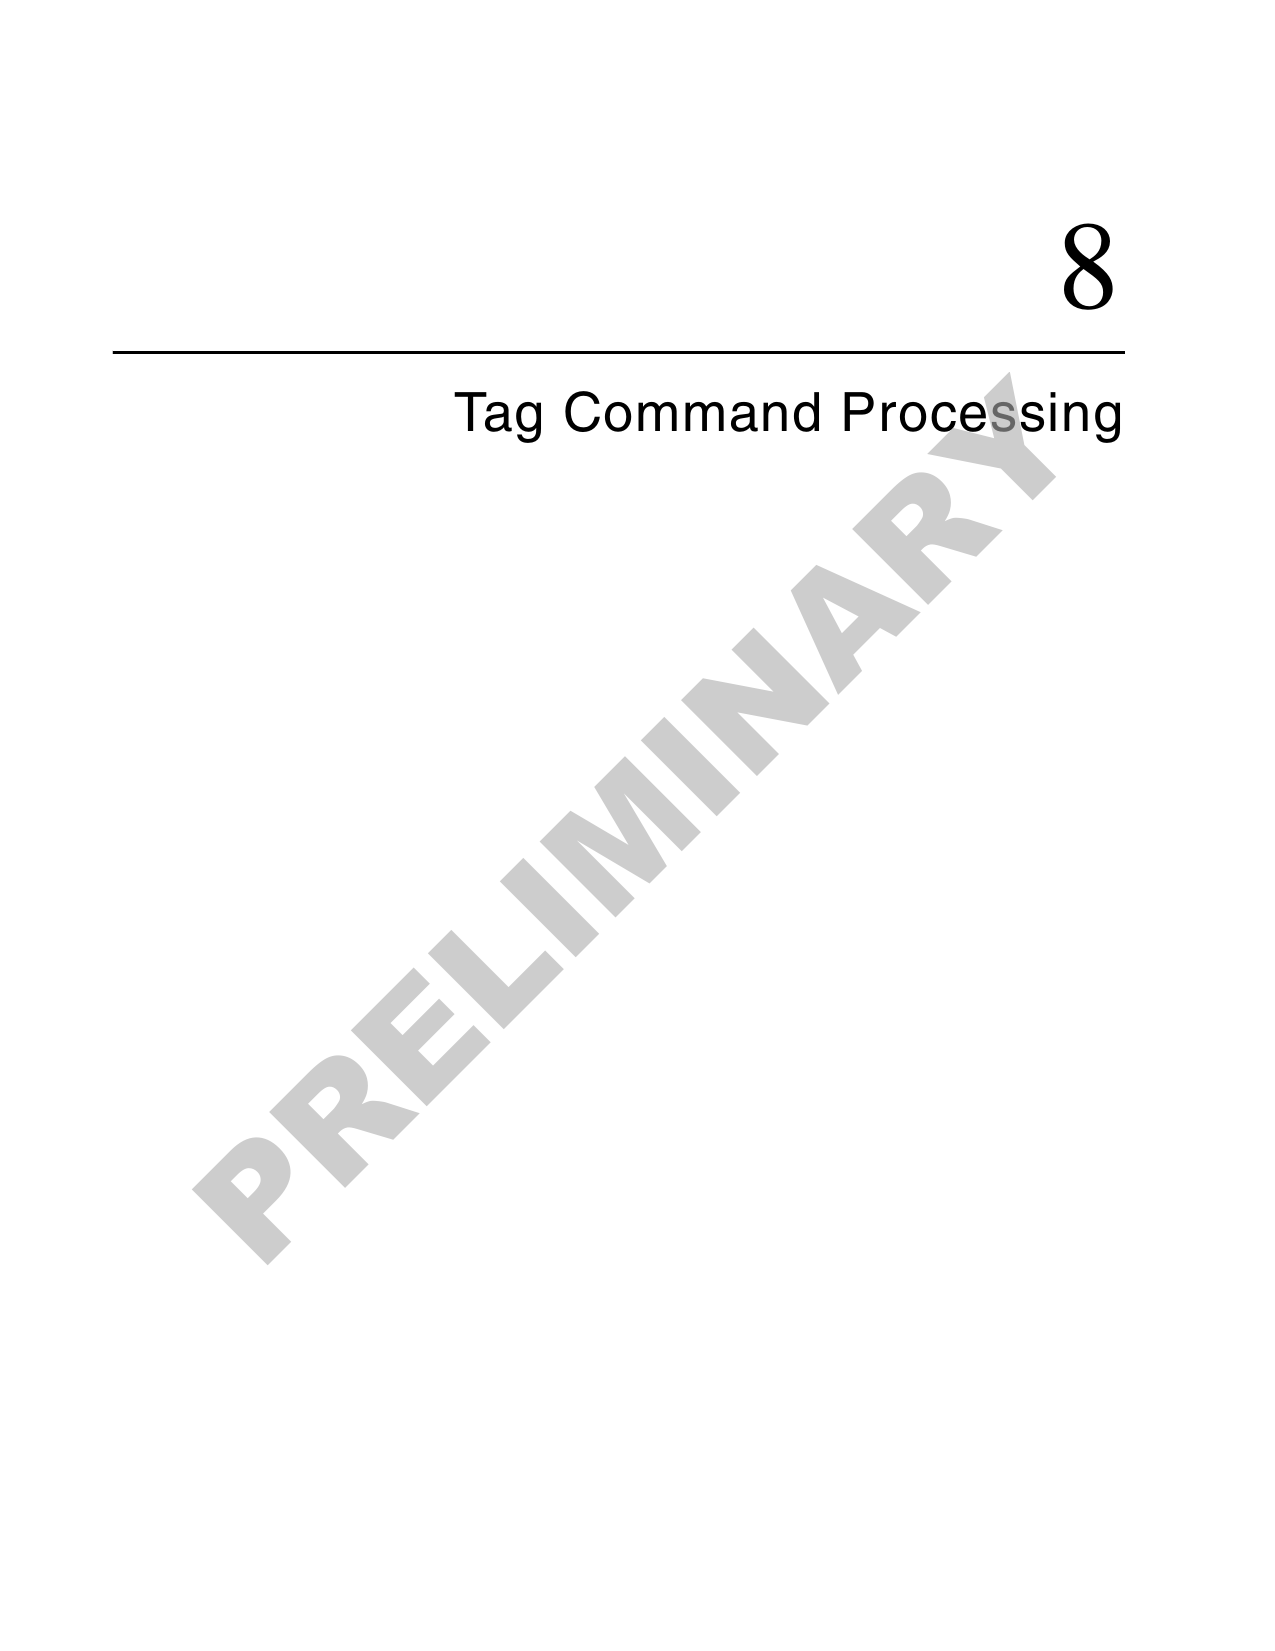 8Tag Command ProcessingPRELIMINARY